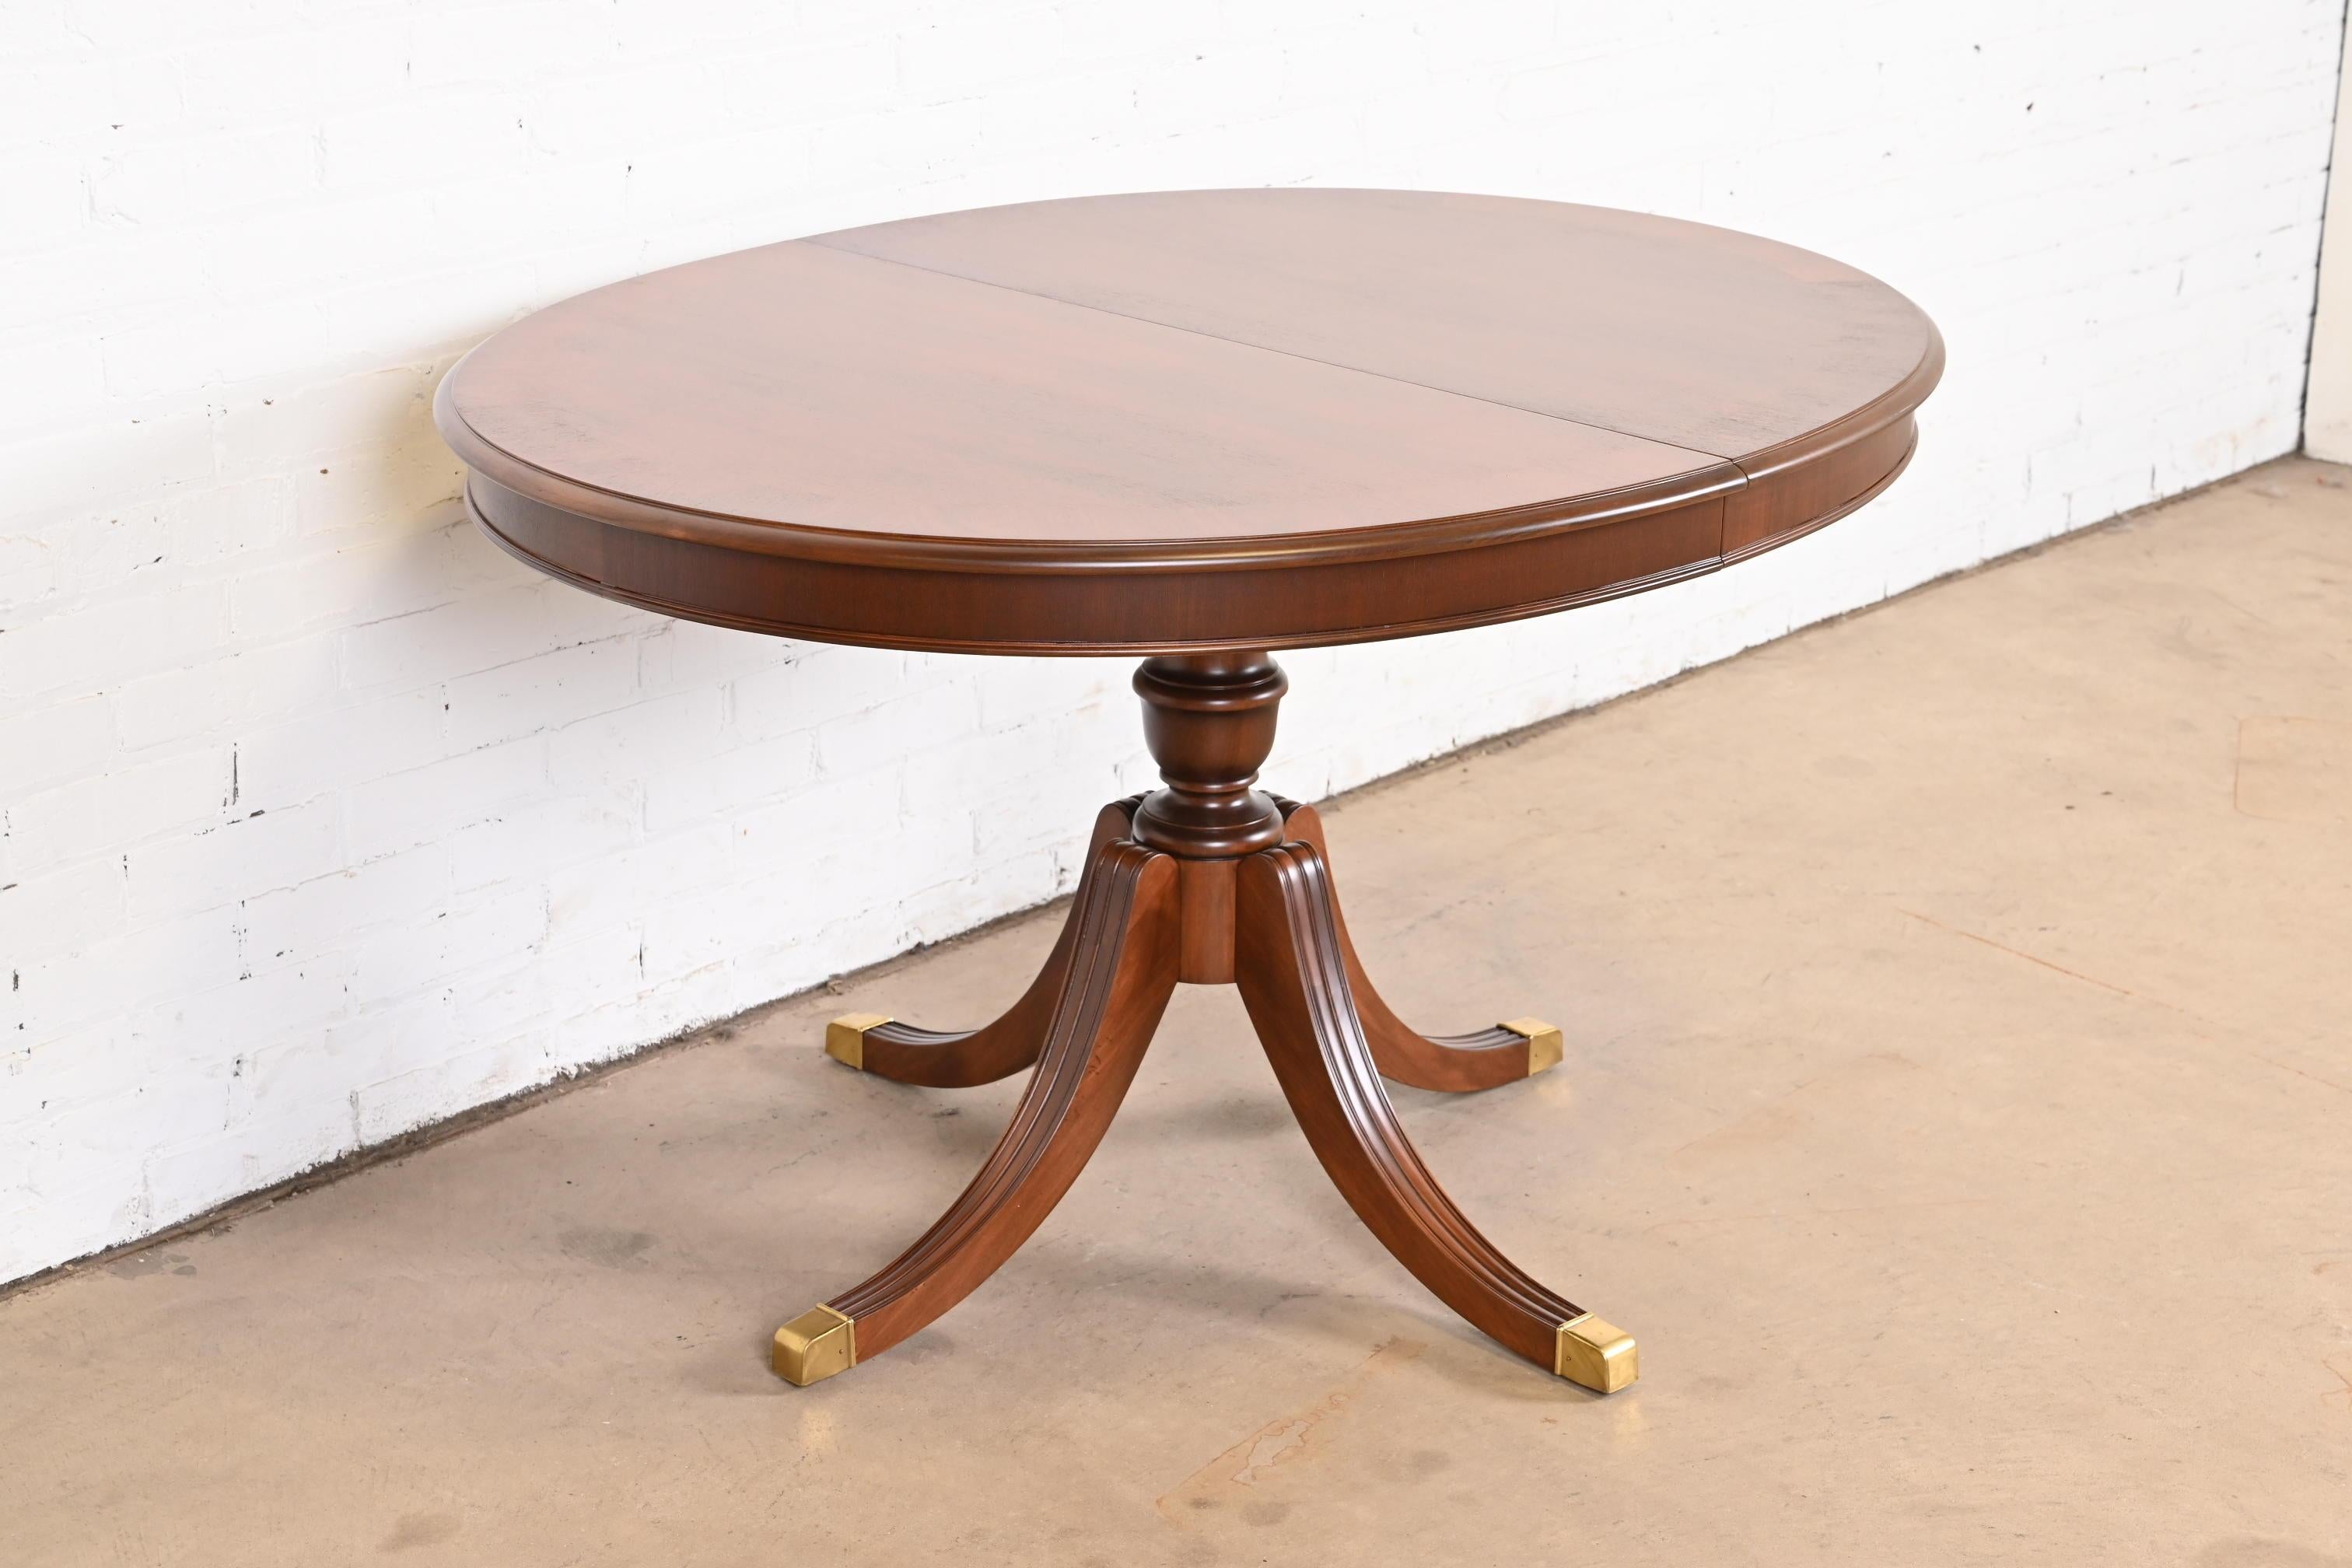 Mid-20th Century Drexel Georgian Mahogany Pedestal Extension Dining Table, Newly Refinished